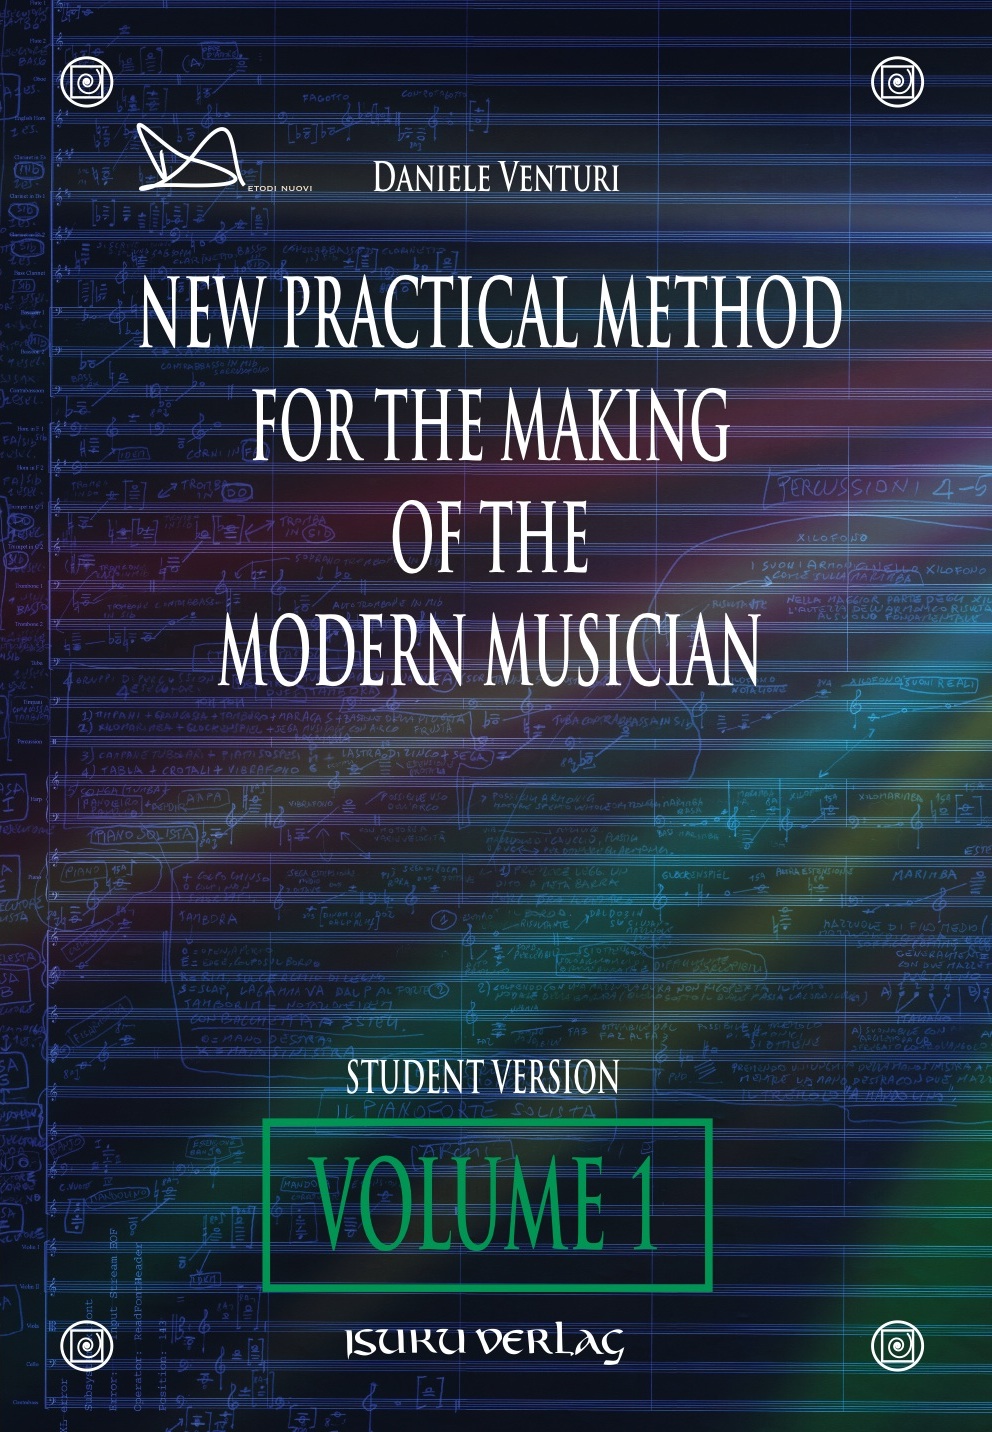 New practical method for the making of the modern musician